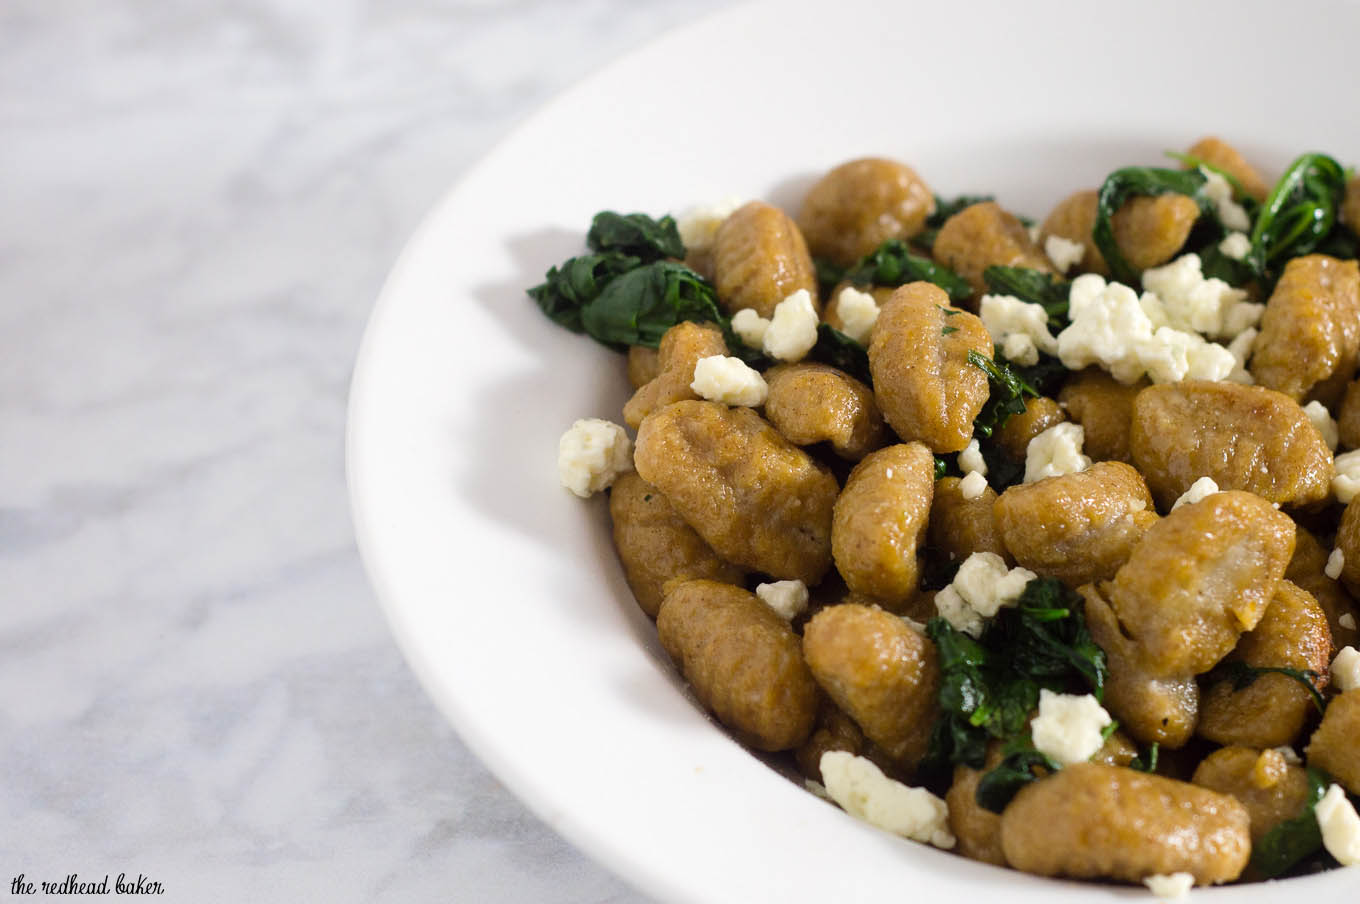 Pumpkin gnocchi and spinach with sage brown butter sauce is a hearty vegetarian meal full of flavor. You won't miss the meat! #SundaySupper